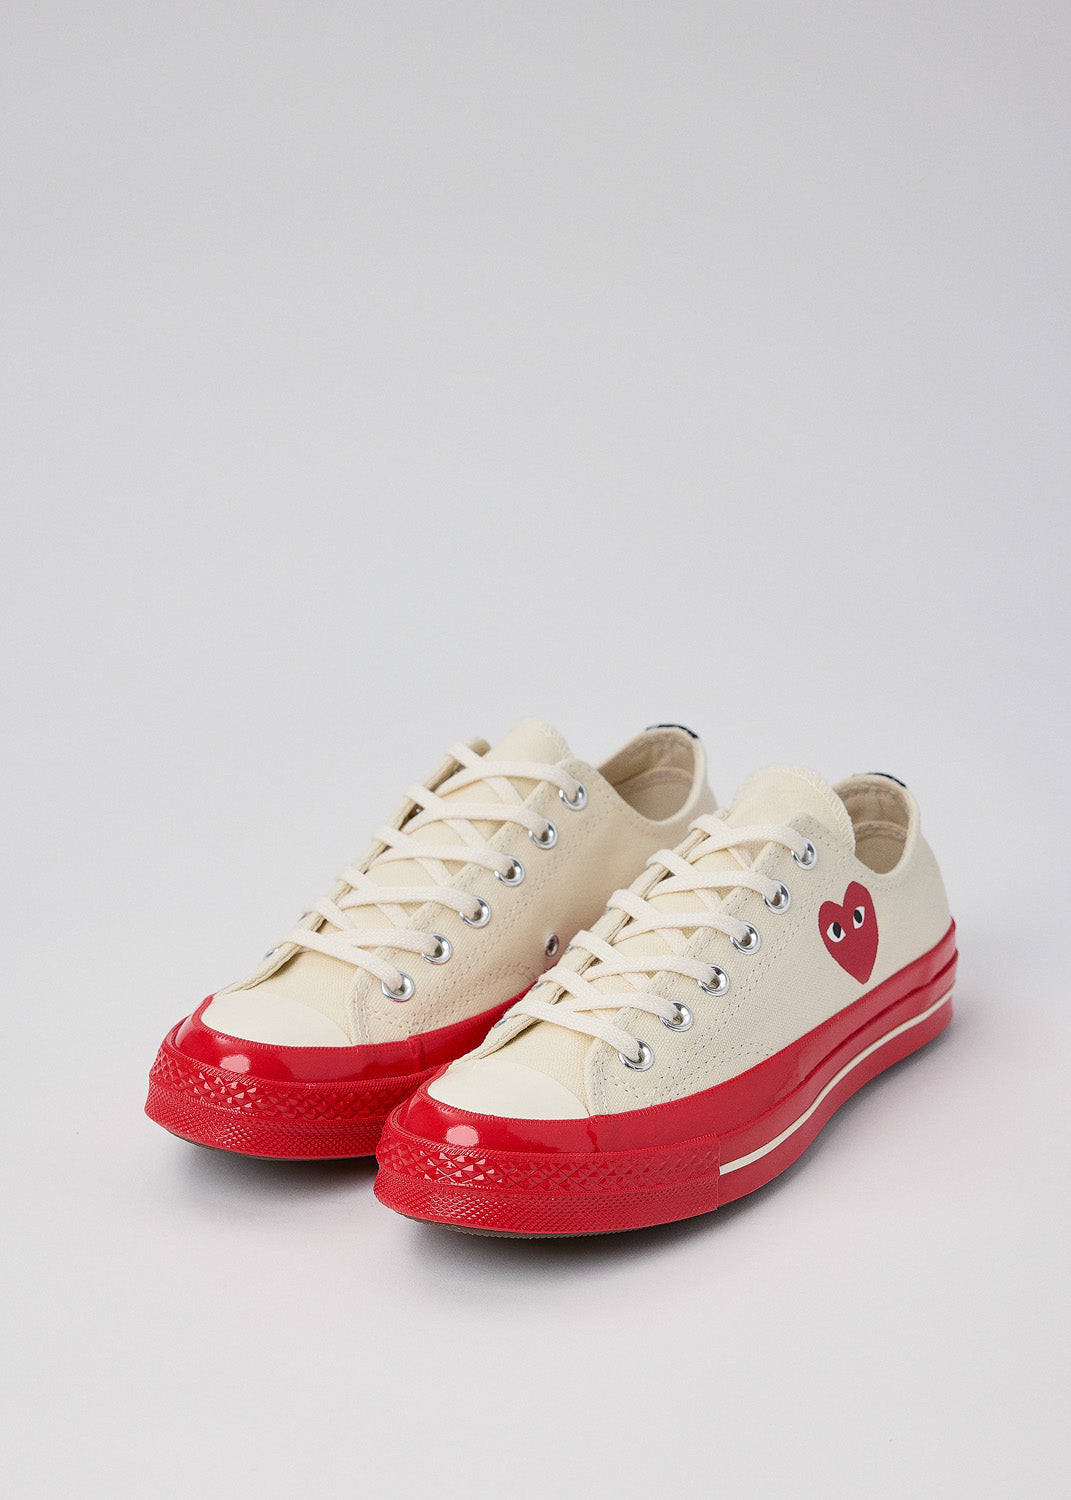 Comme des Garçons PLAY - Off-White Converse Edition Red Sole Chuck 70 Low Sneakers | 1032 SPACE